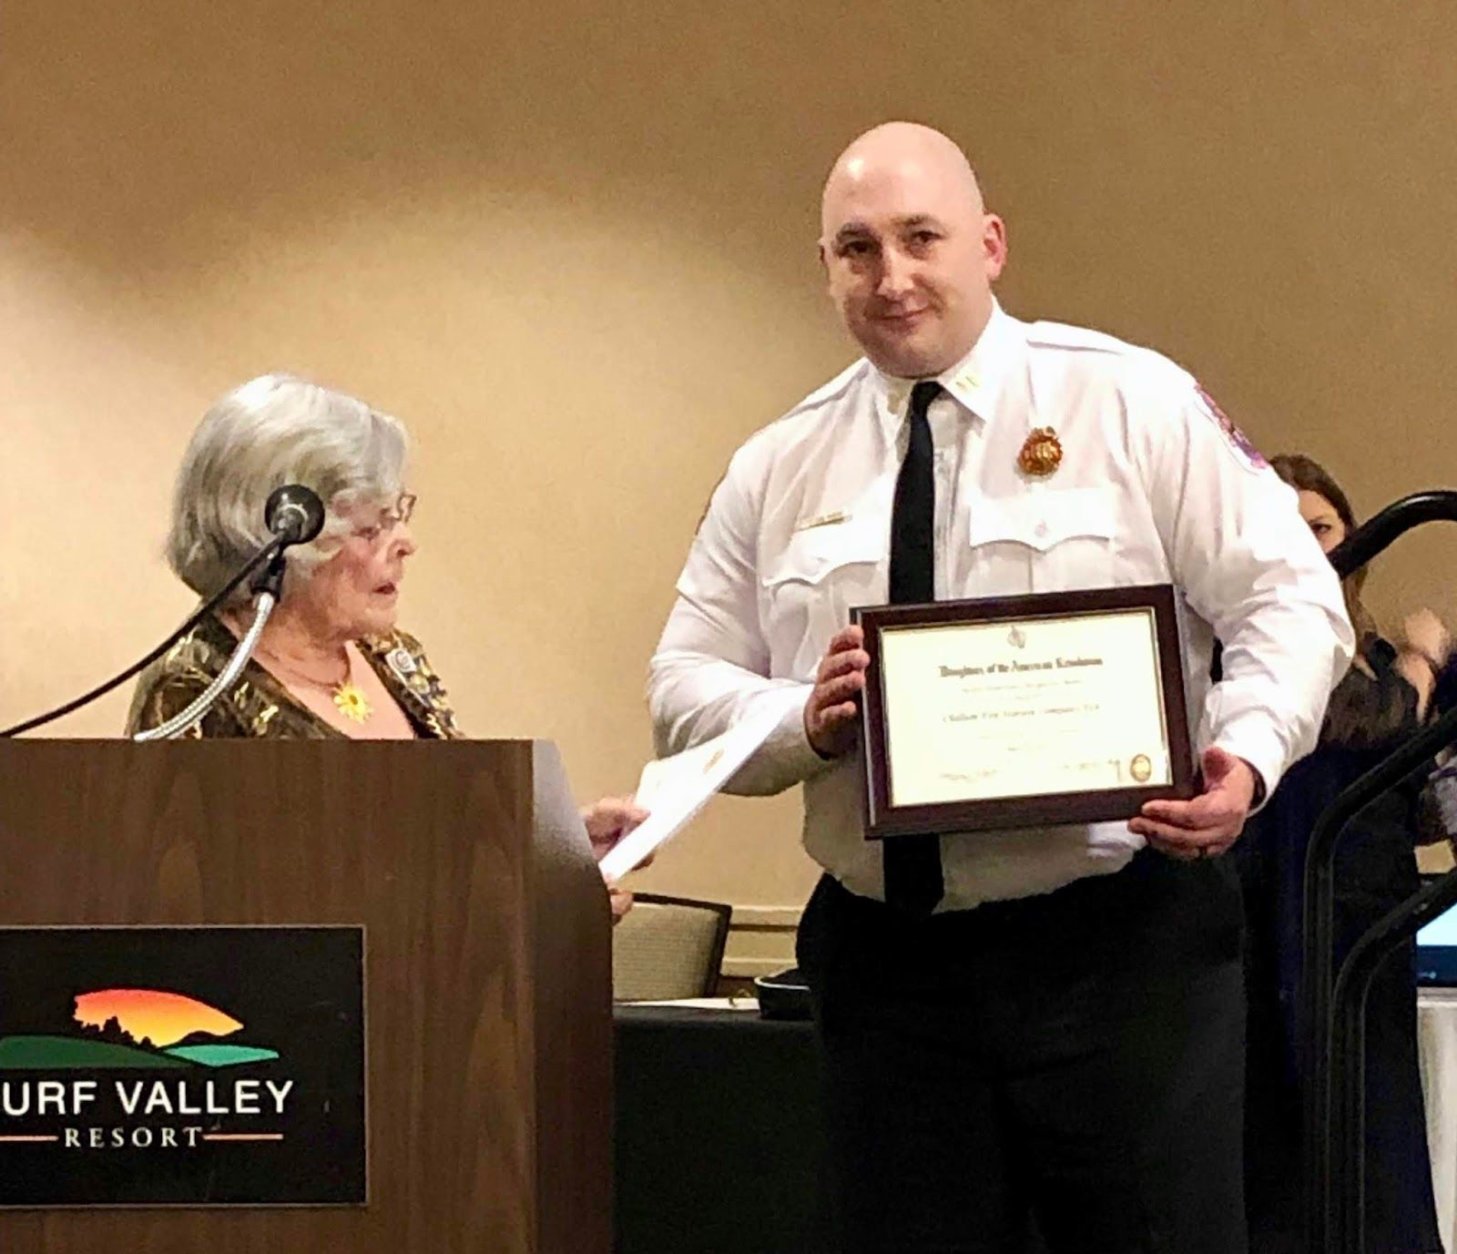 Barbara May, Historic Preservation Awards Chairman for the Daughters of the American Revolution, presents Captain Ushinski with the Historic Preservation Award. (Courtesy Prince George's County Fire and EMS)